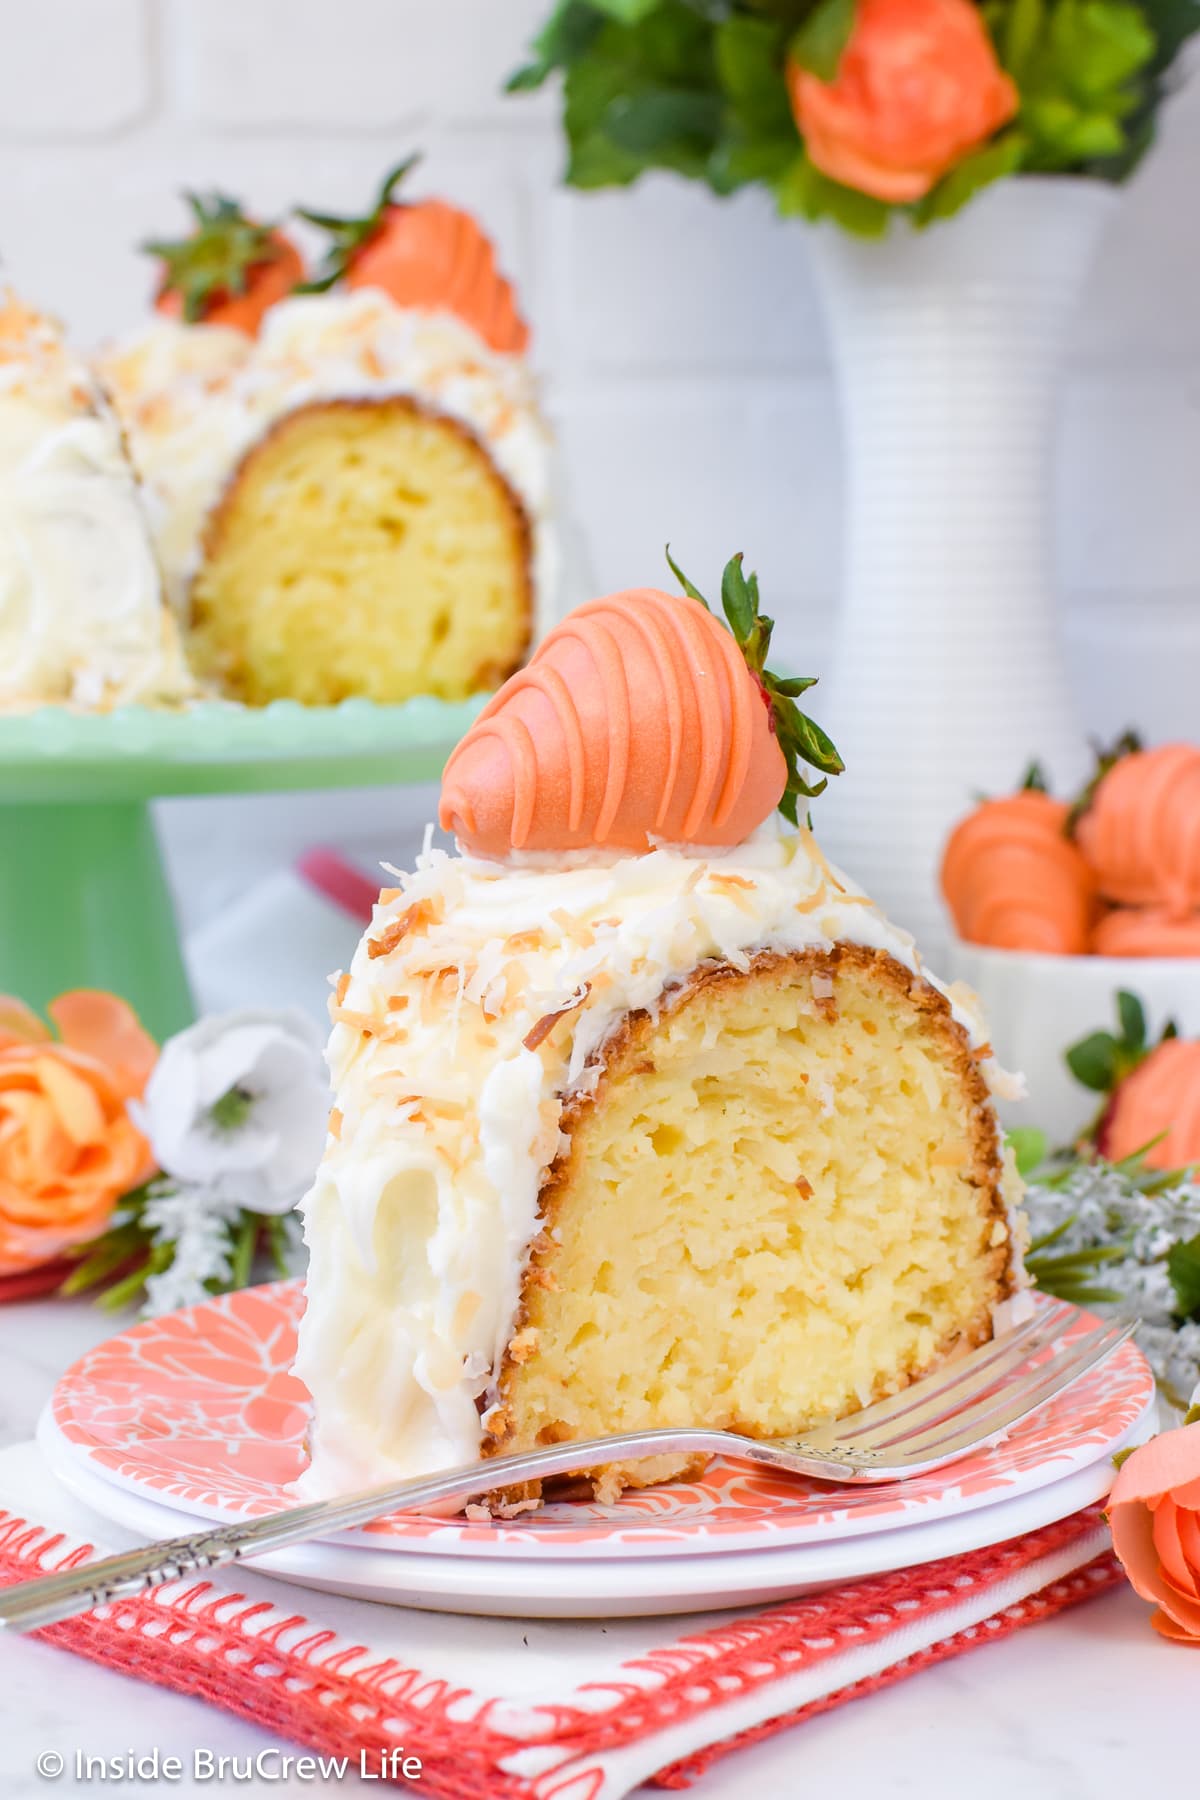 An orange plate with a slice of cake with frosting on it.